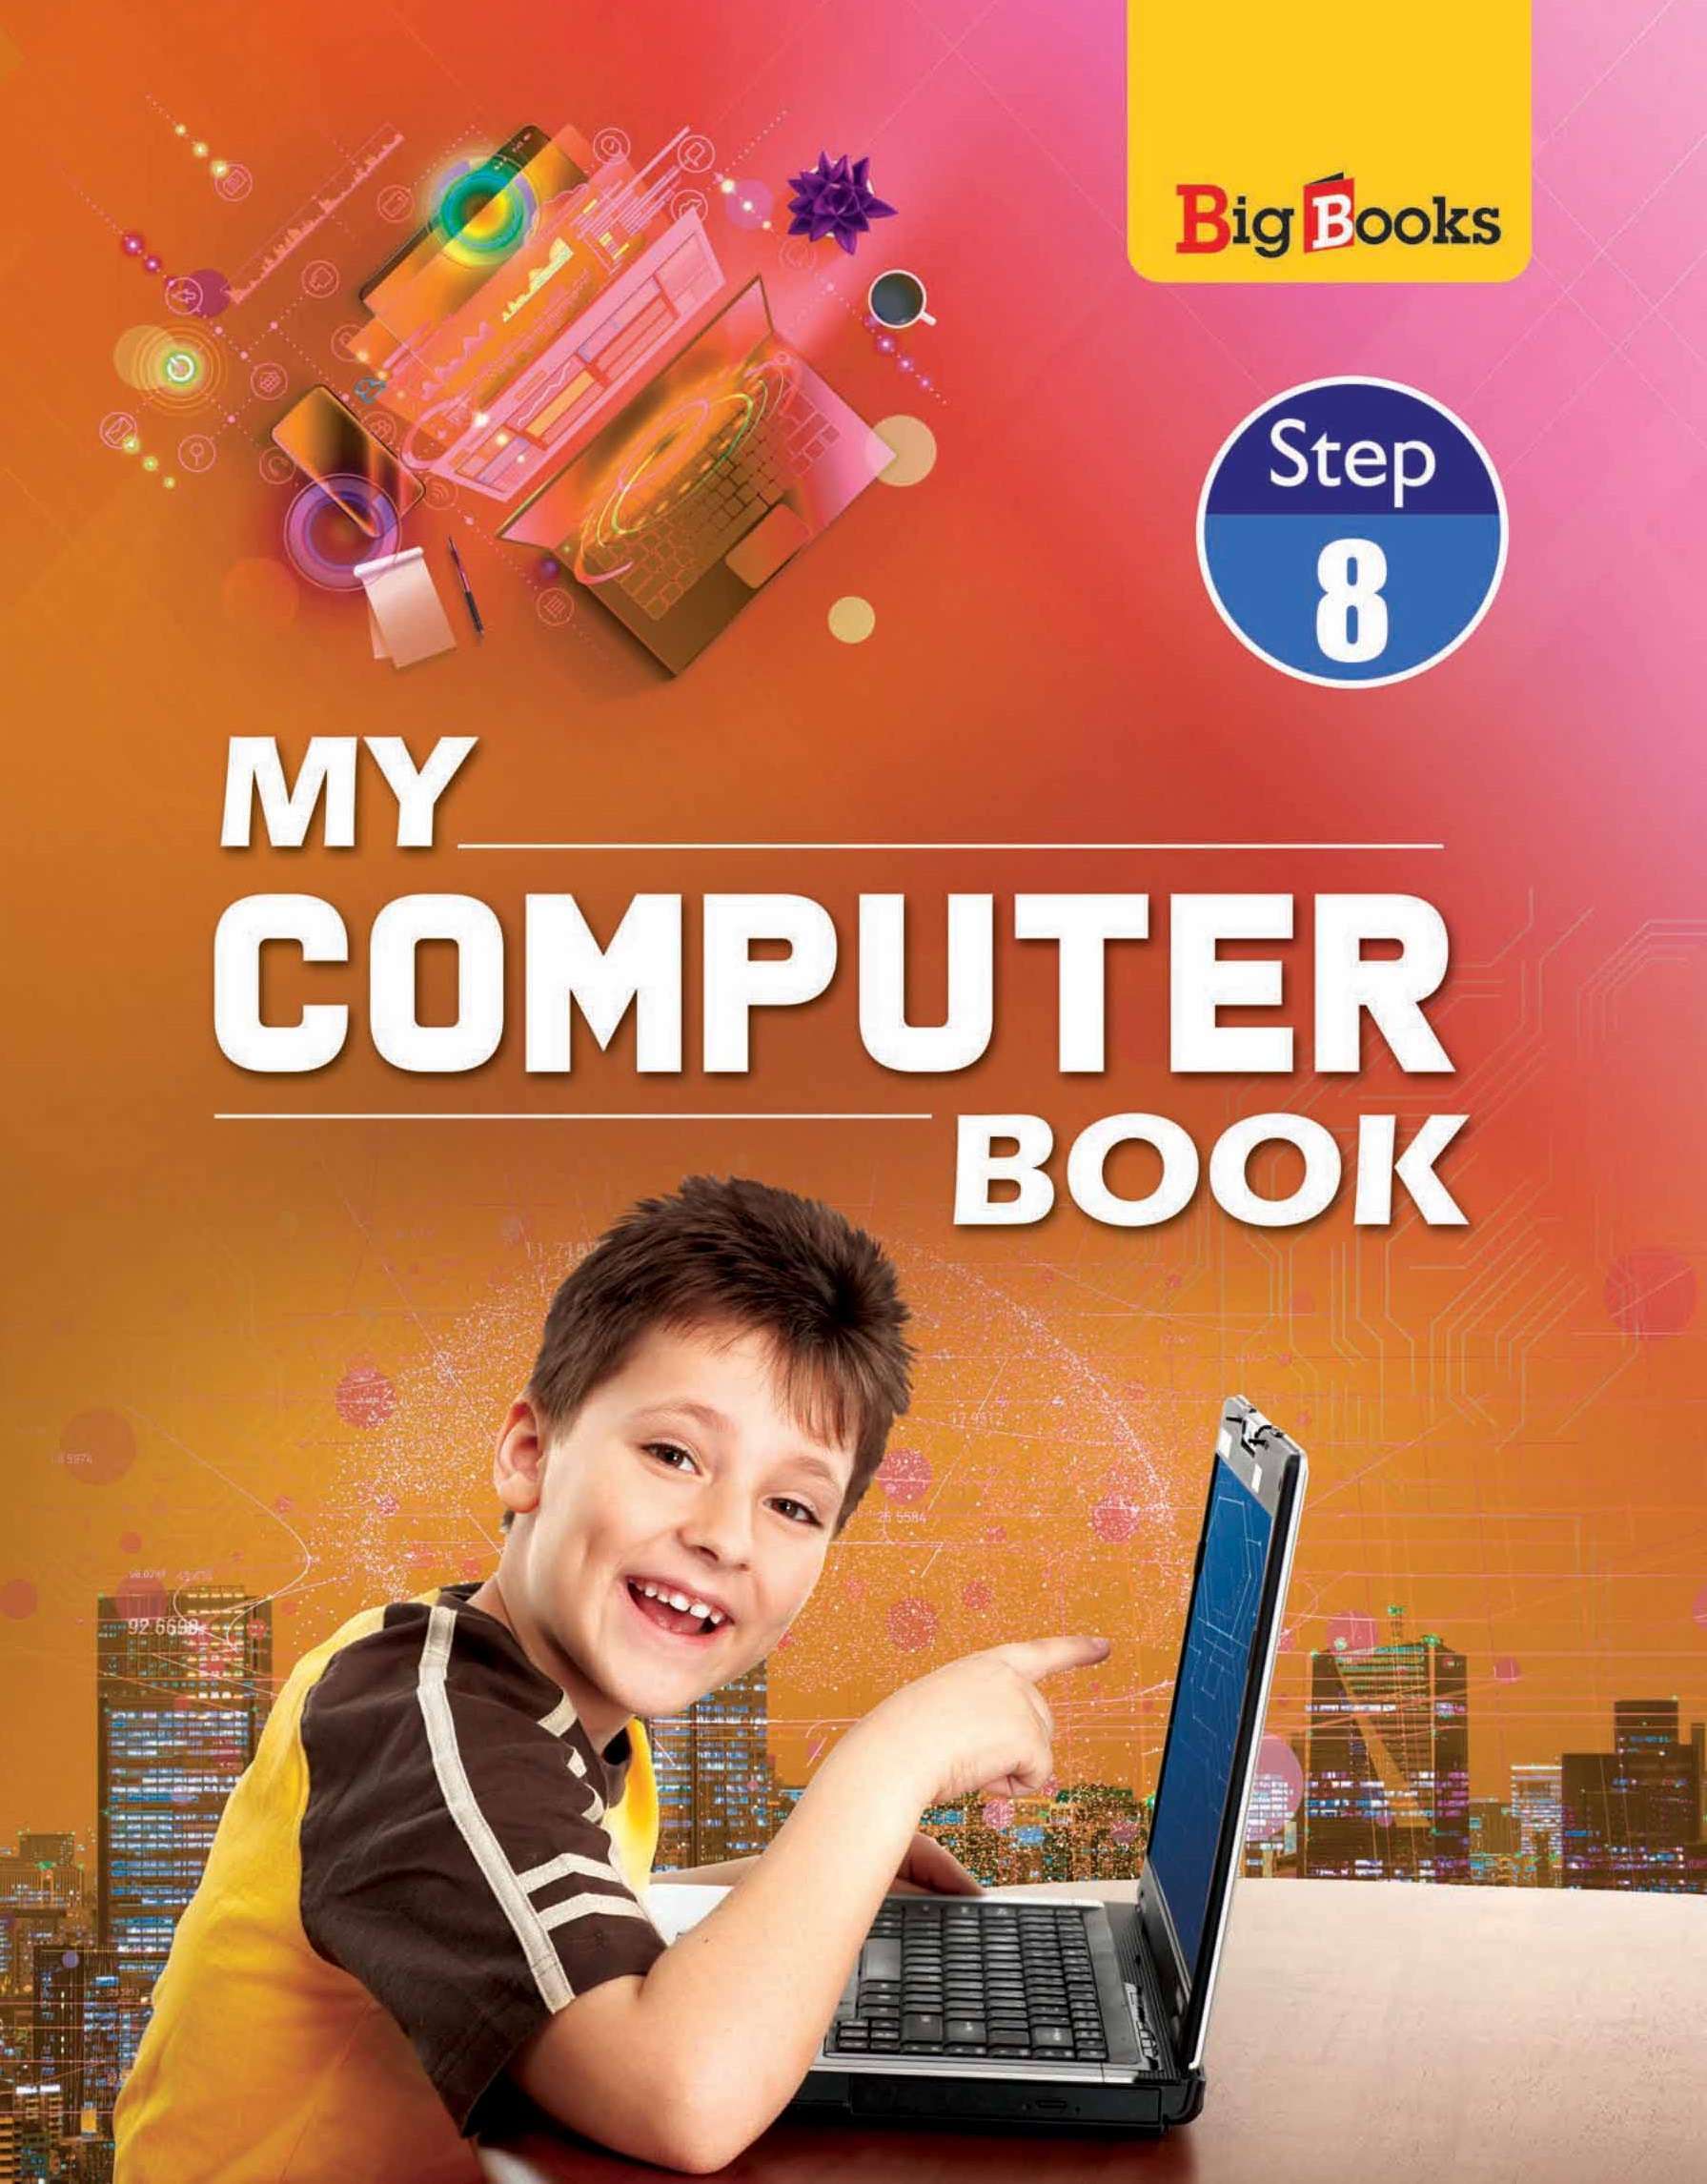 Buy computer books for 8 online